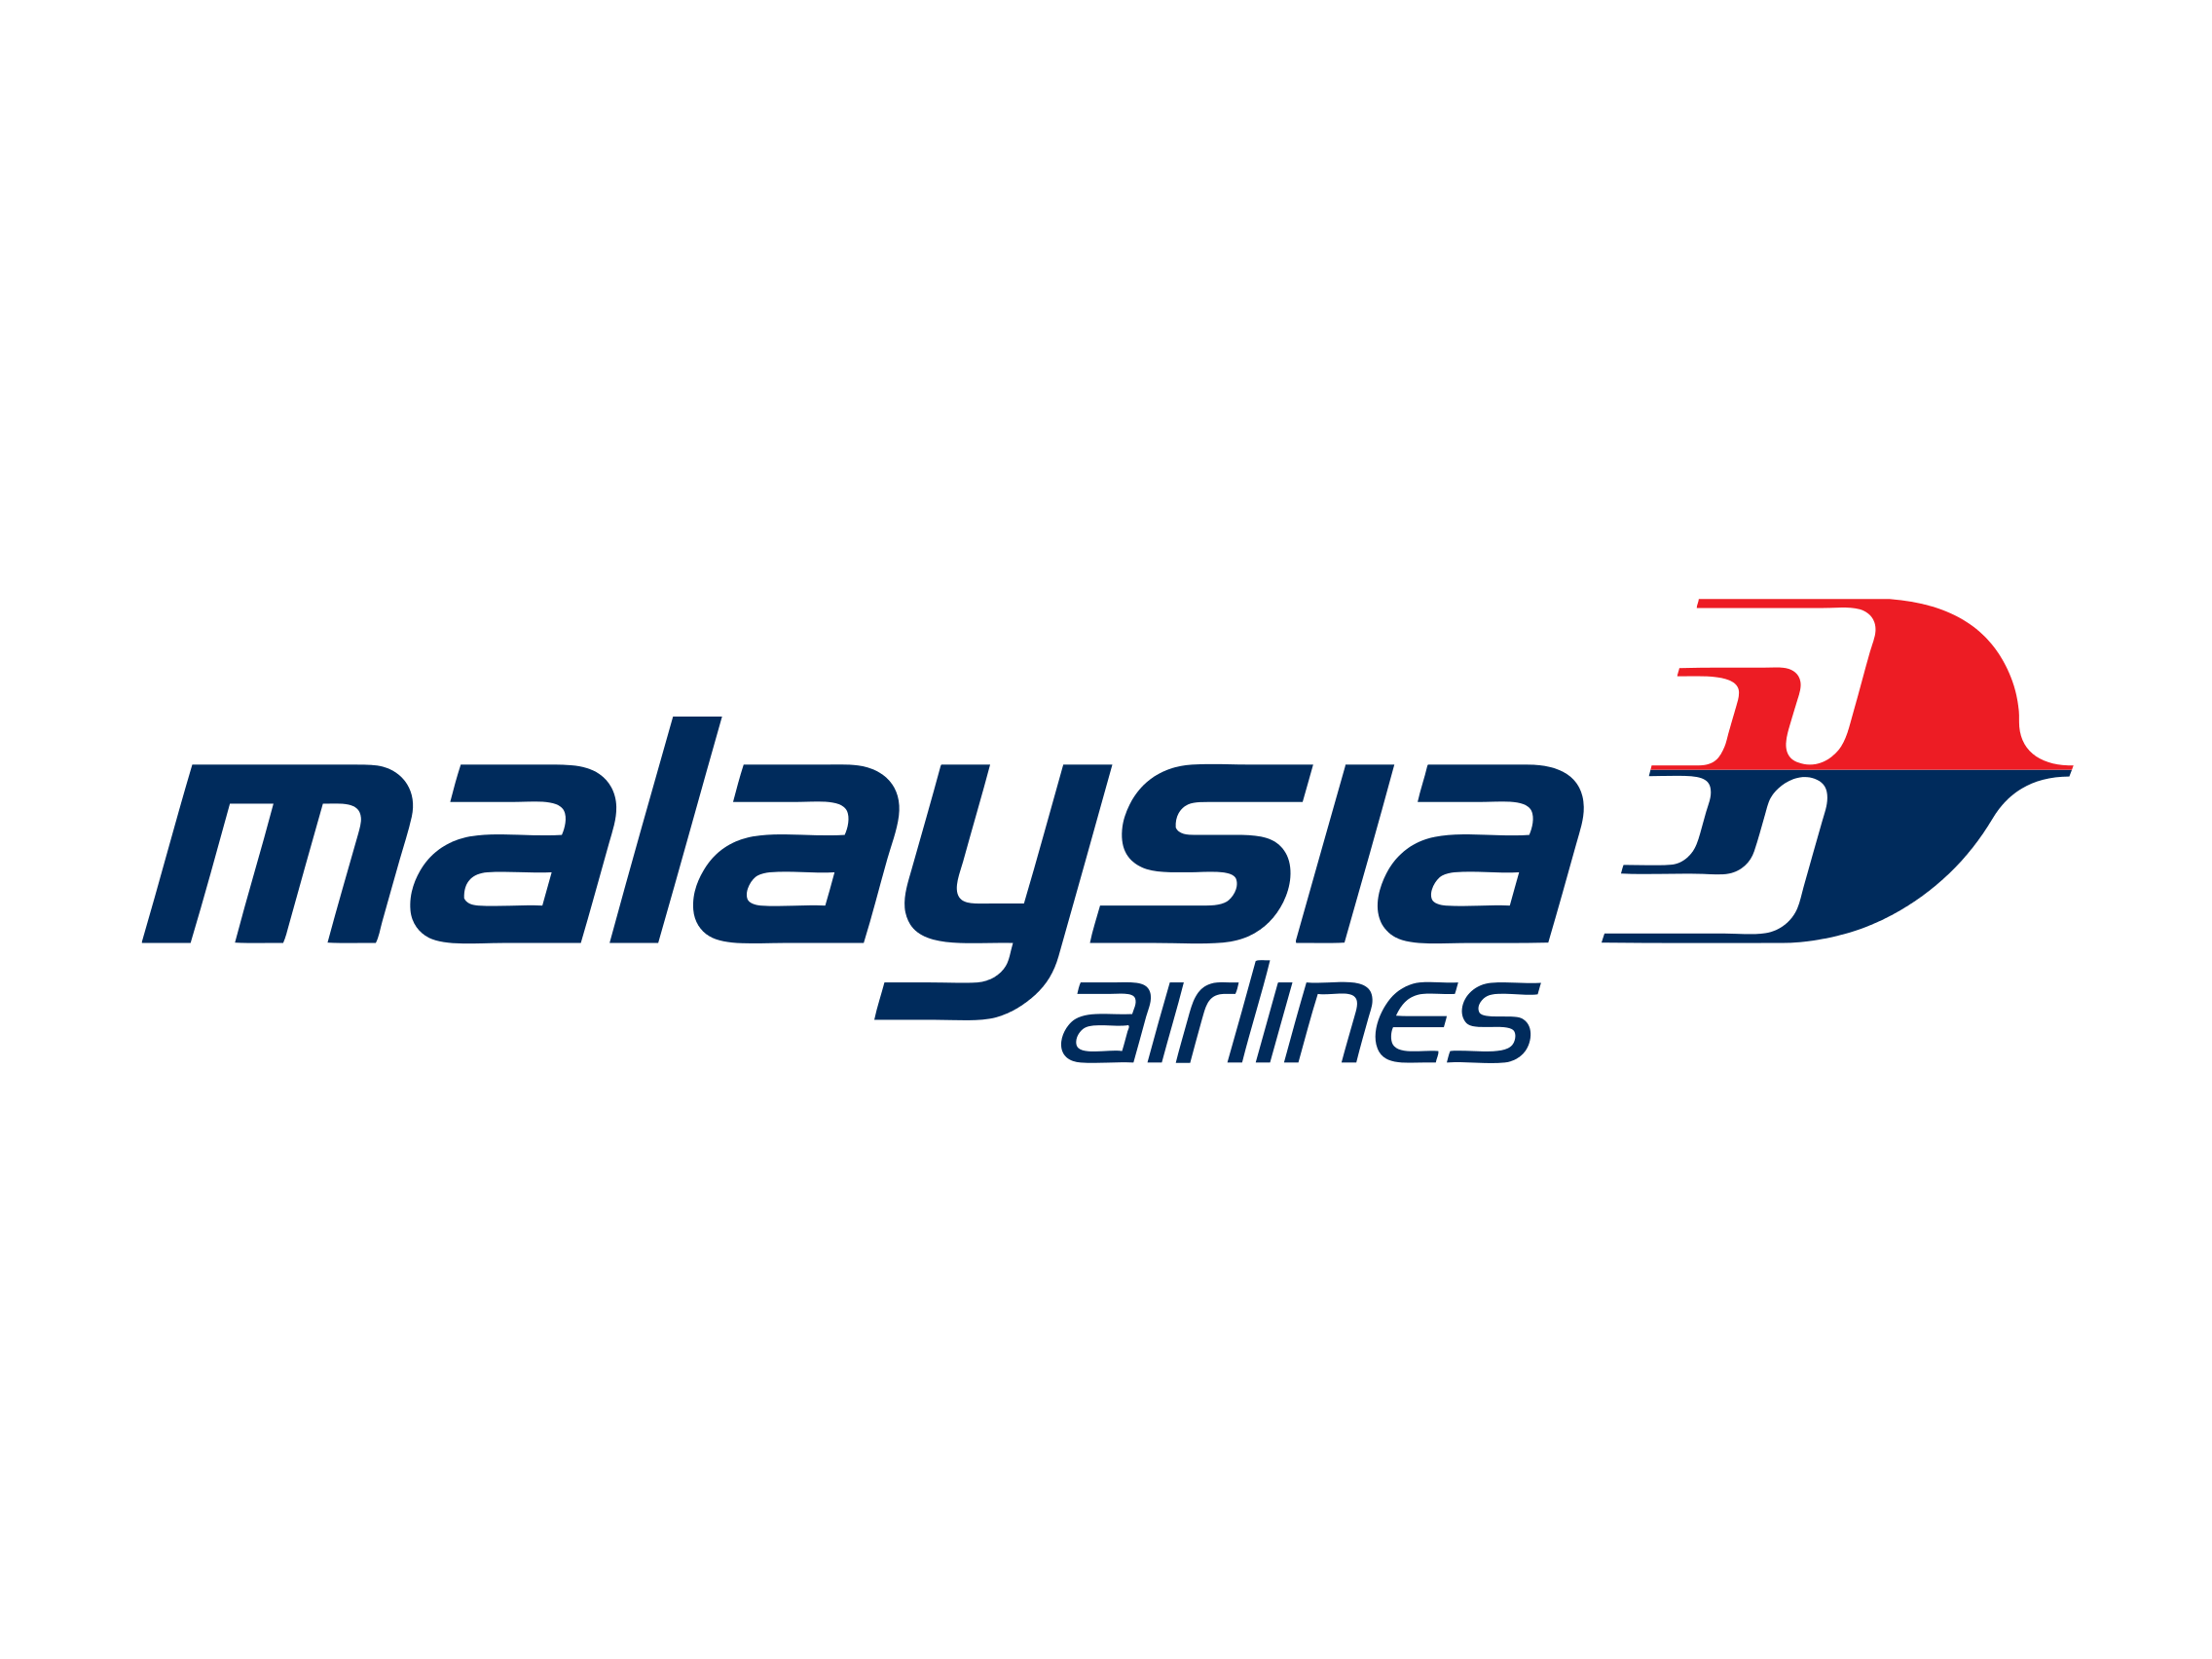 Country Airline Logo - Malaysia Airlines logo | Logok